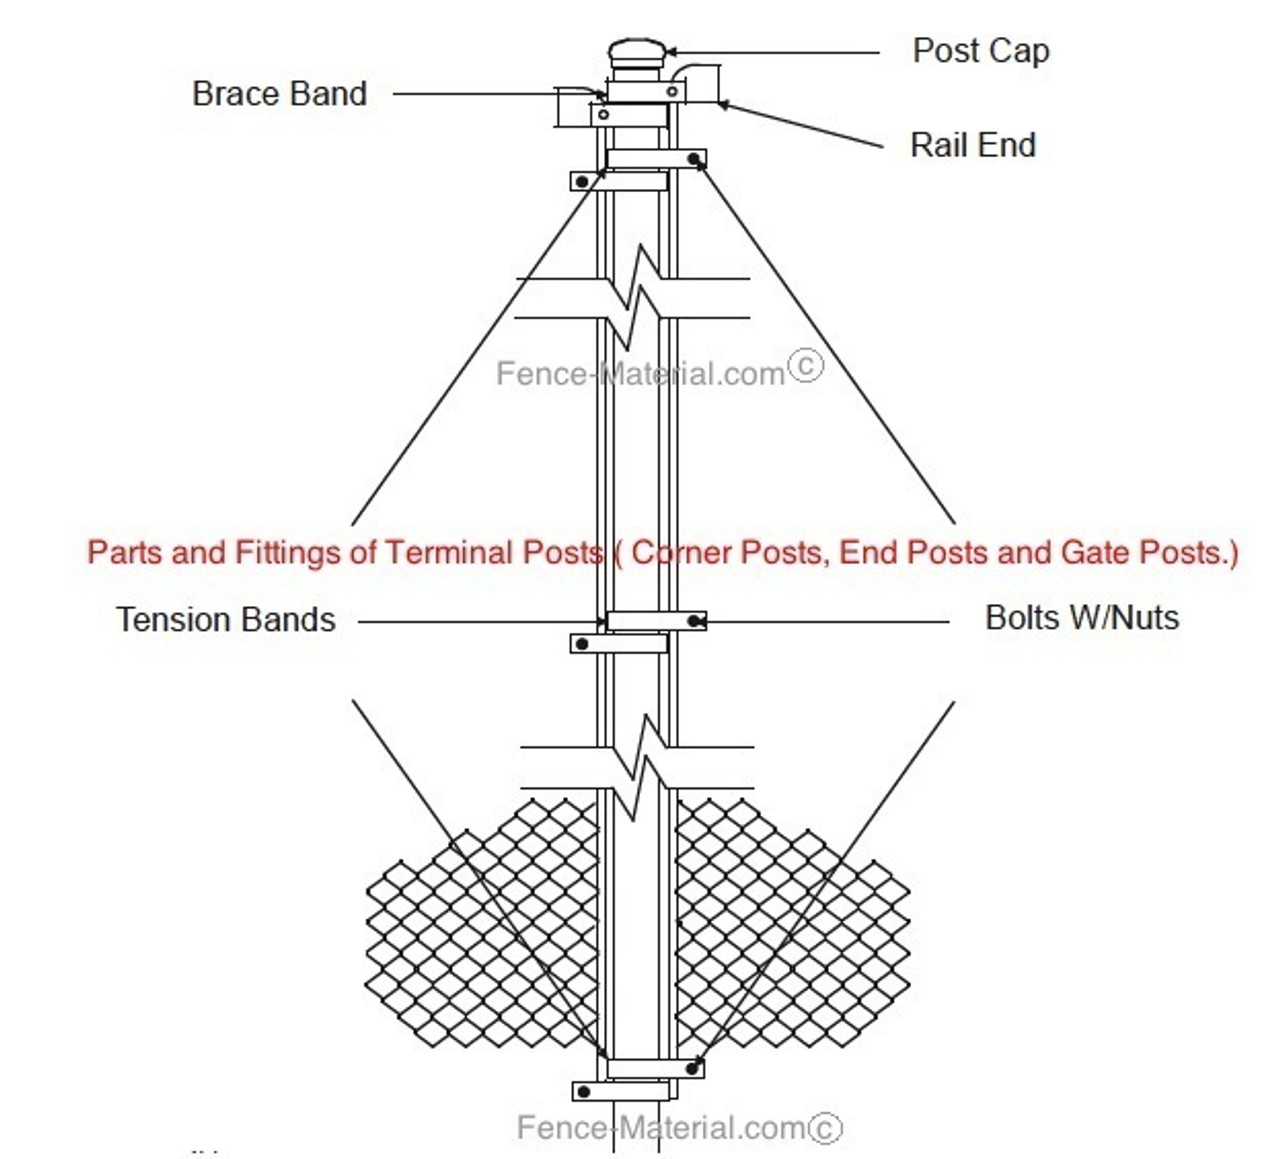 12ft tall Galvanized Commercial Fence Kit, Plain or Barb Wire Top . Includes:  Top Rail (1-5/8"), Mesh (2" x 9 gauge).    Line Post, End Post, Corner Post, Gate Post and Gates are extra, purchased separately below. Price is per ft.